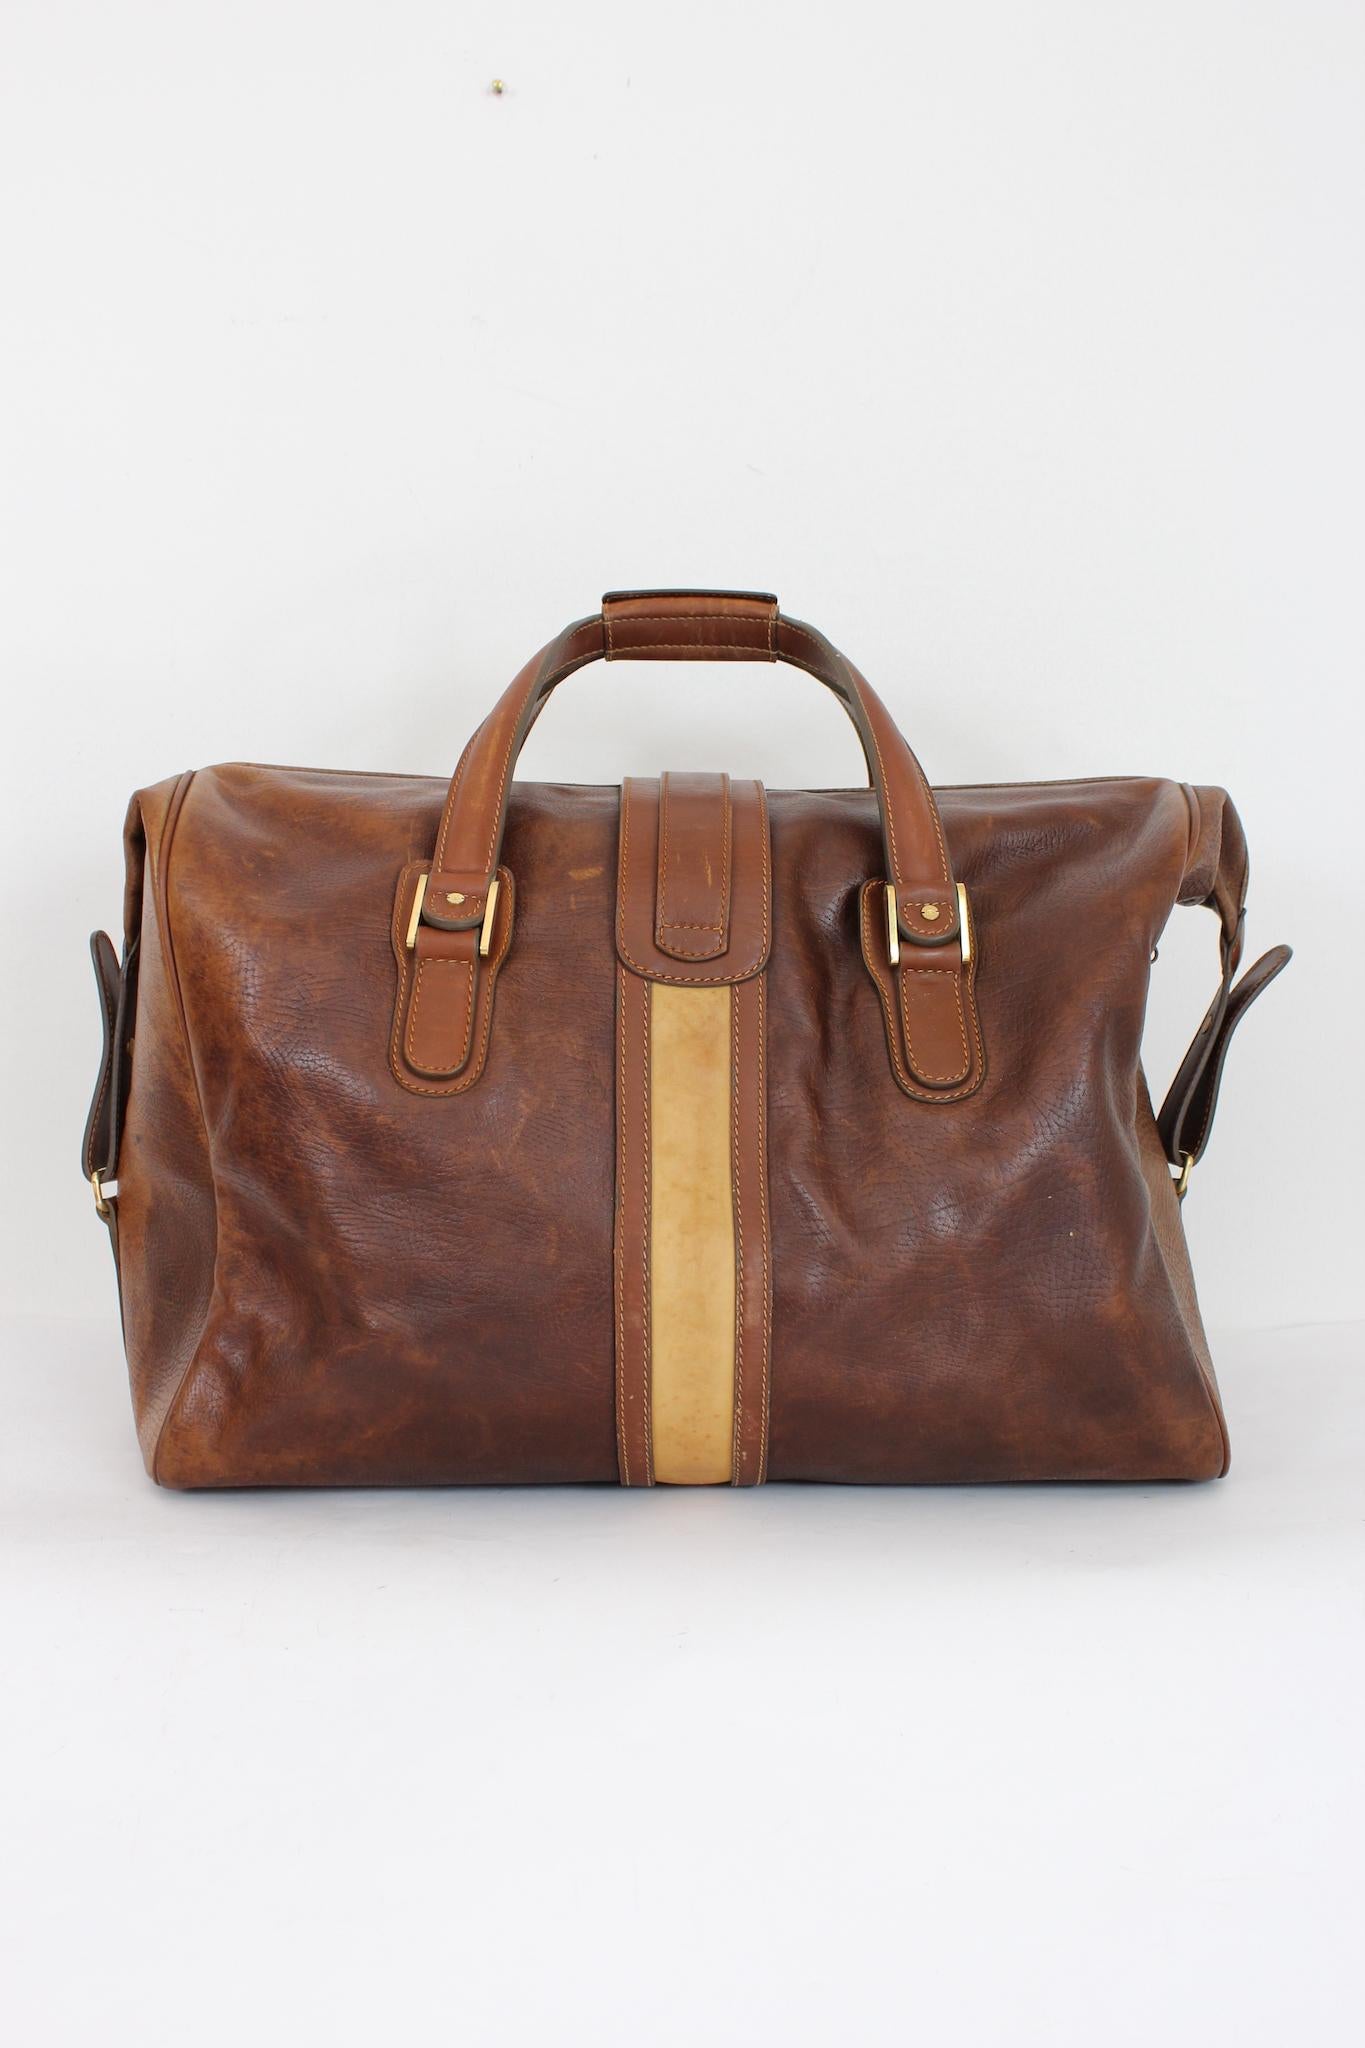 Gucci vintage 80s duffle bag. Made of excellent brown leather, with lighter shades. The bag features brass buckles and trims. The double side buckle can adjust the size of the bag. The interior is made up of a logoed fabric lining, a little faded by